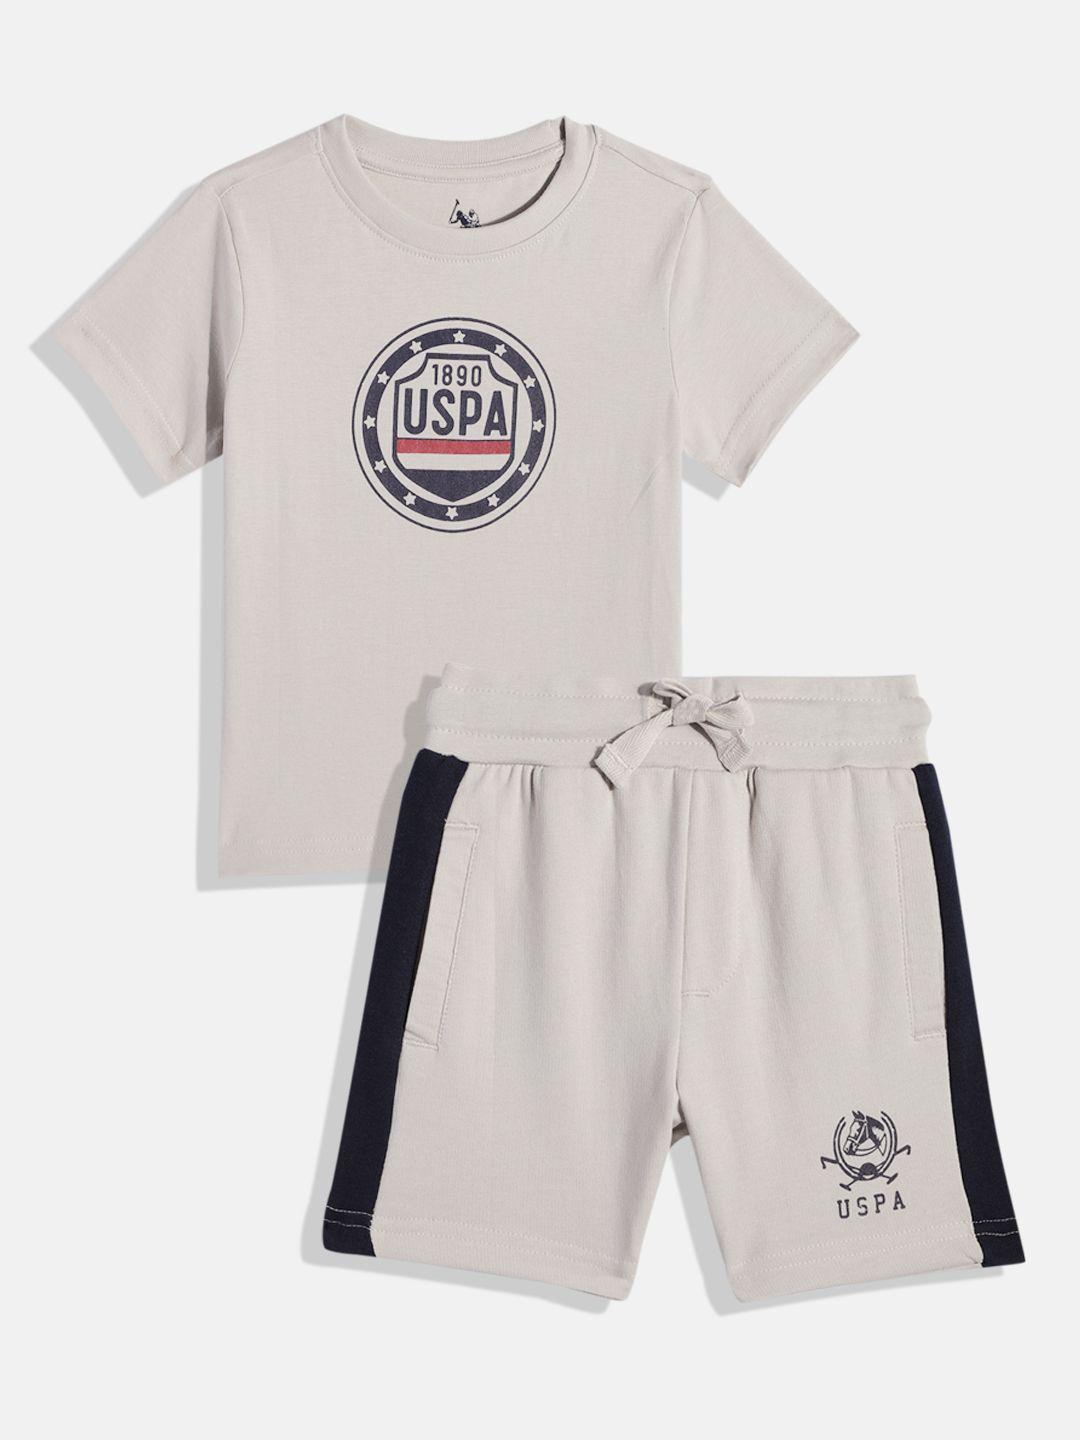 u.s. polo assn. kids boys brand logo print knitted pure cotton t-shirt with shorts